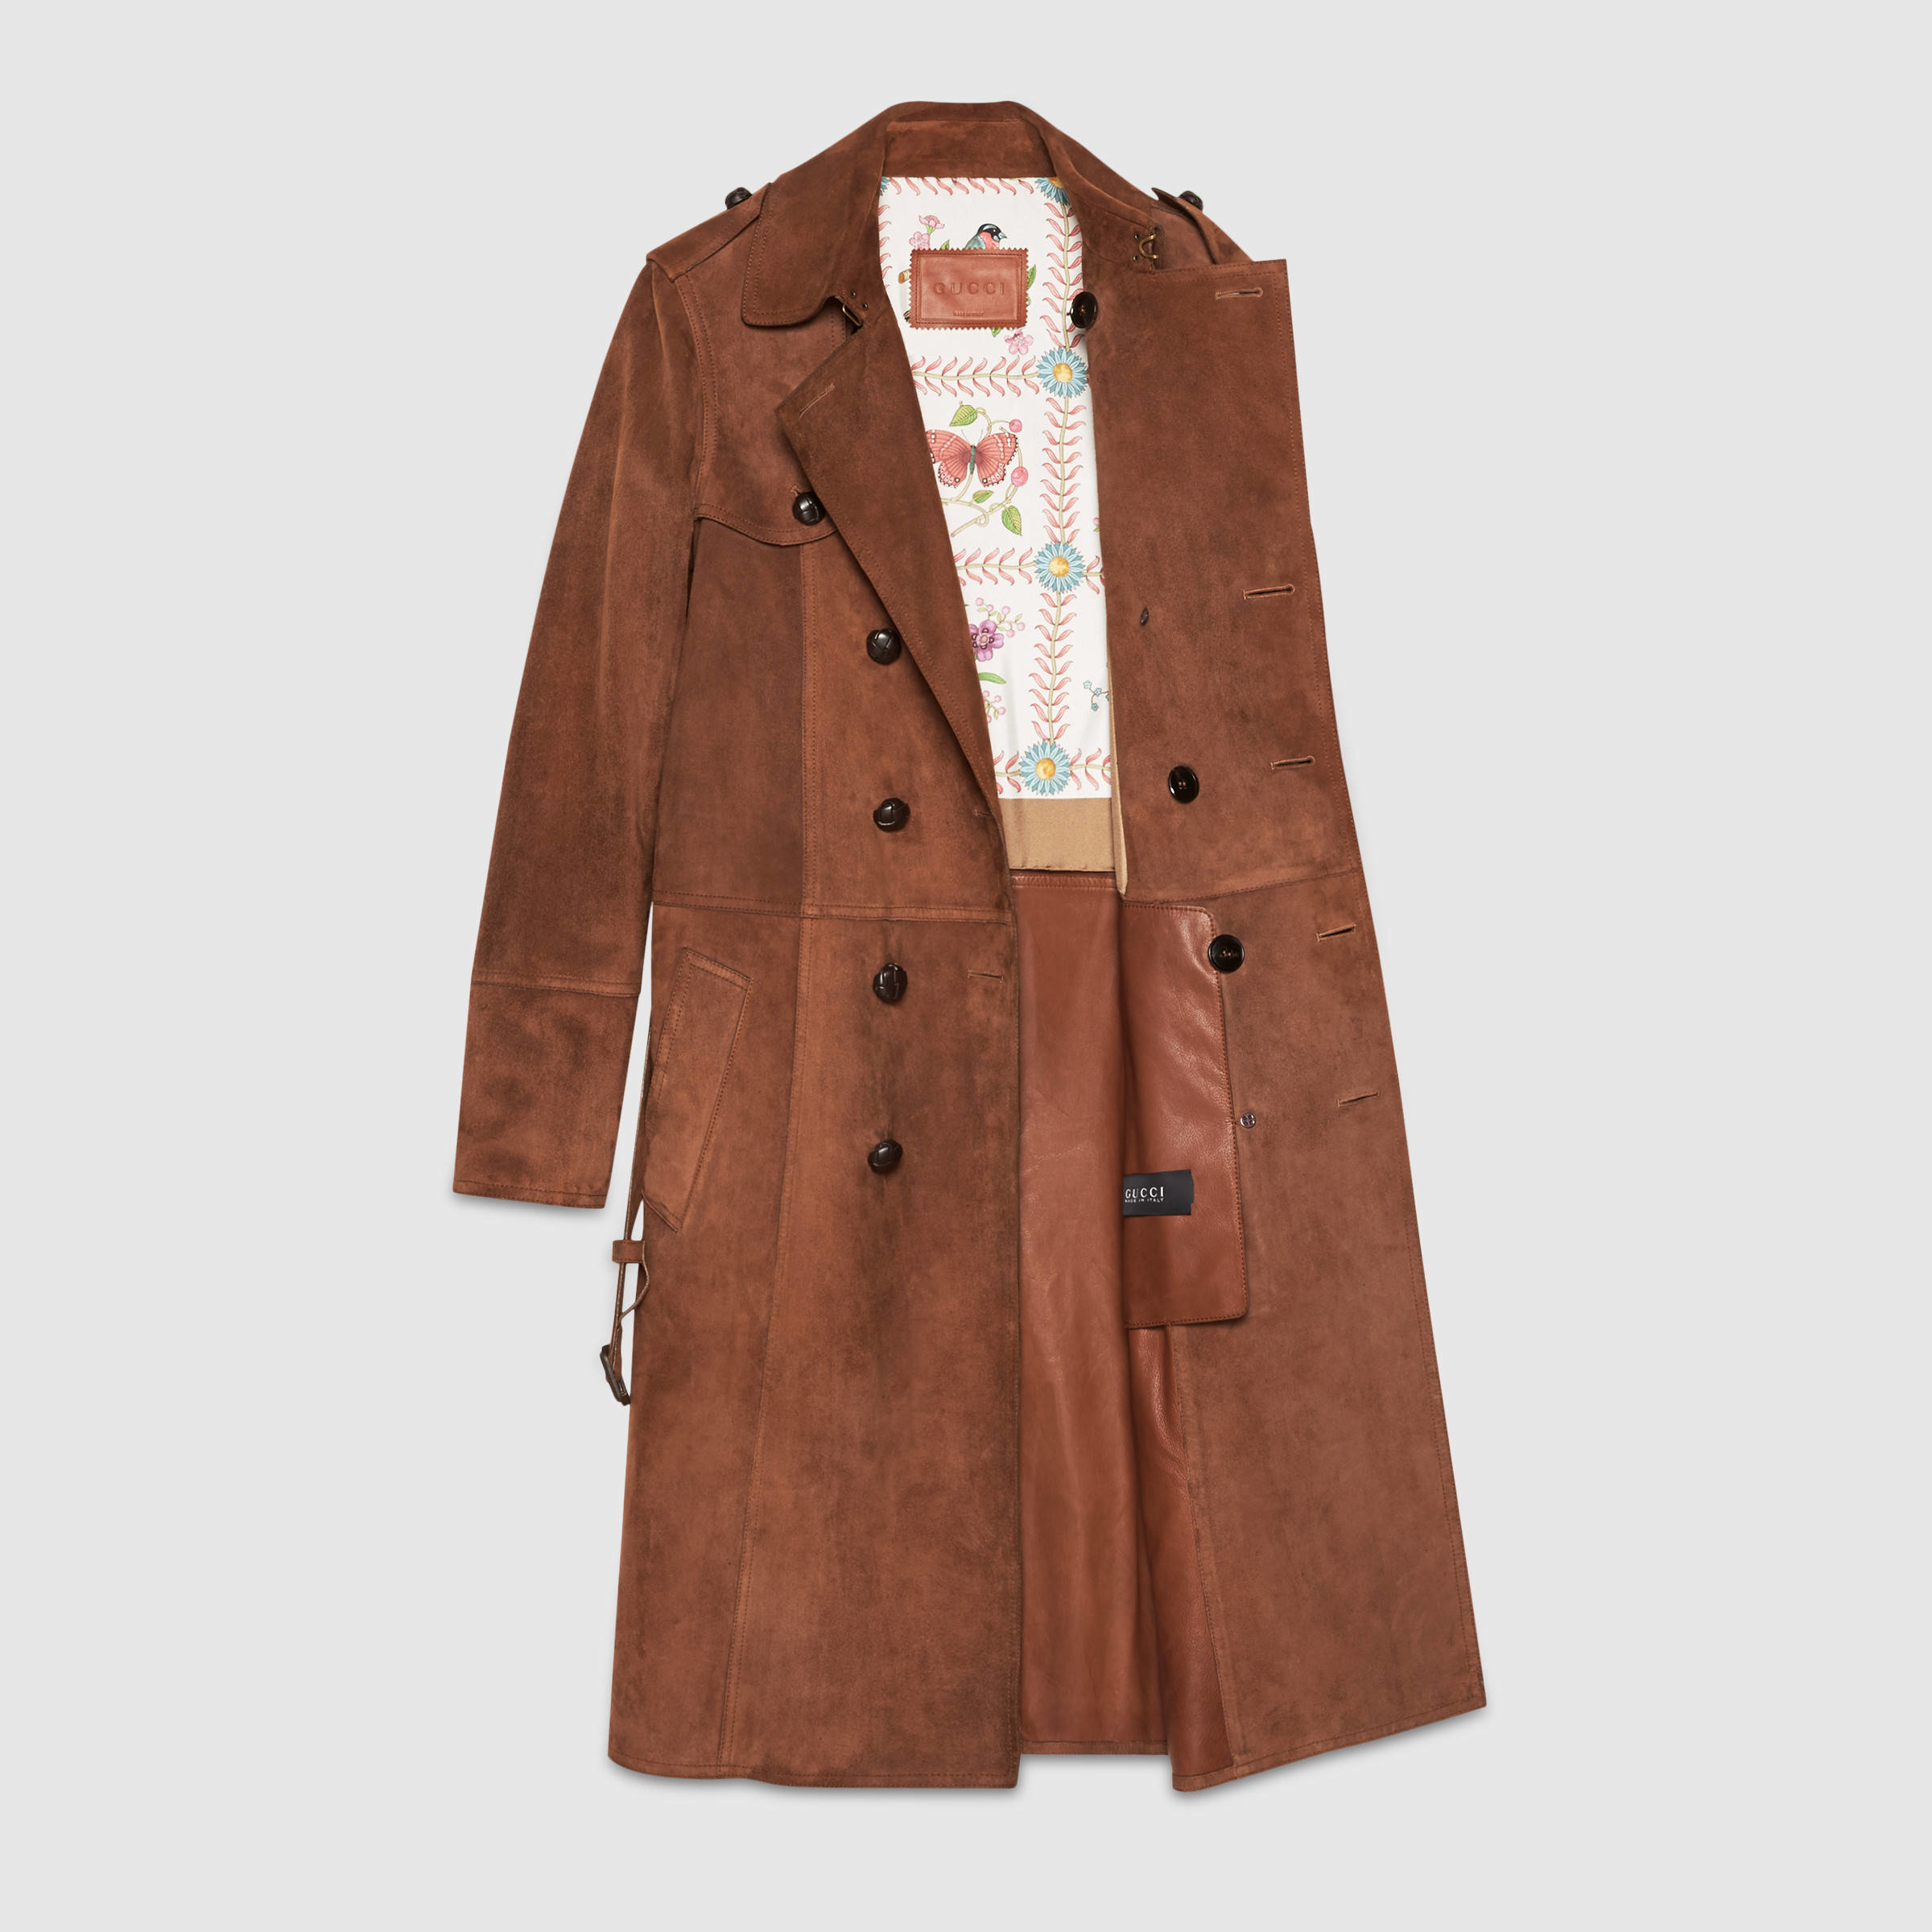 Gucci Suede Belted Trench Coat in Brown